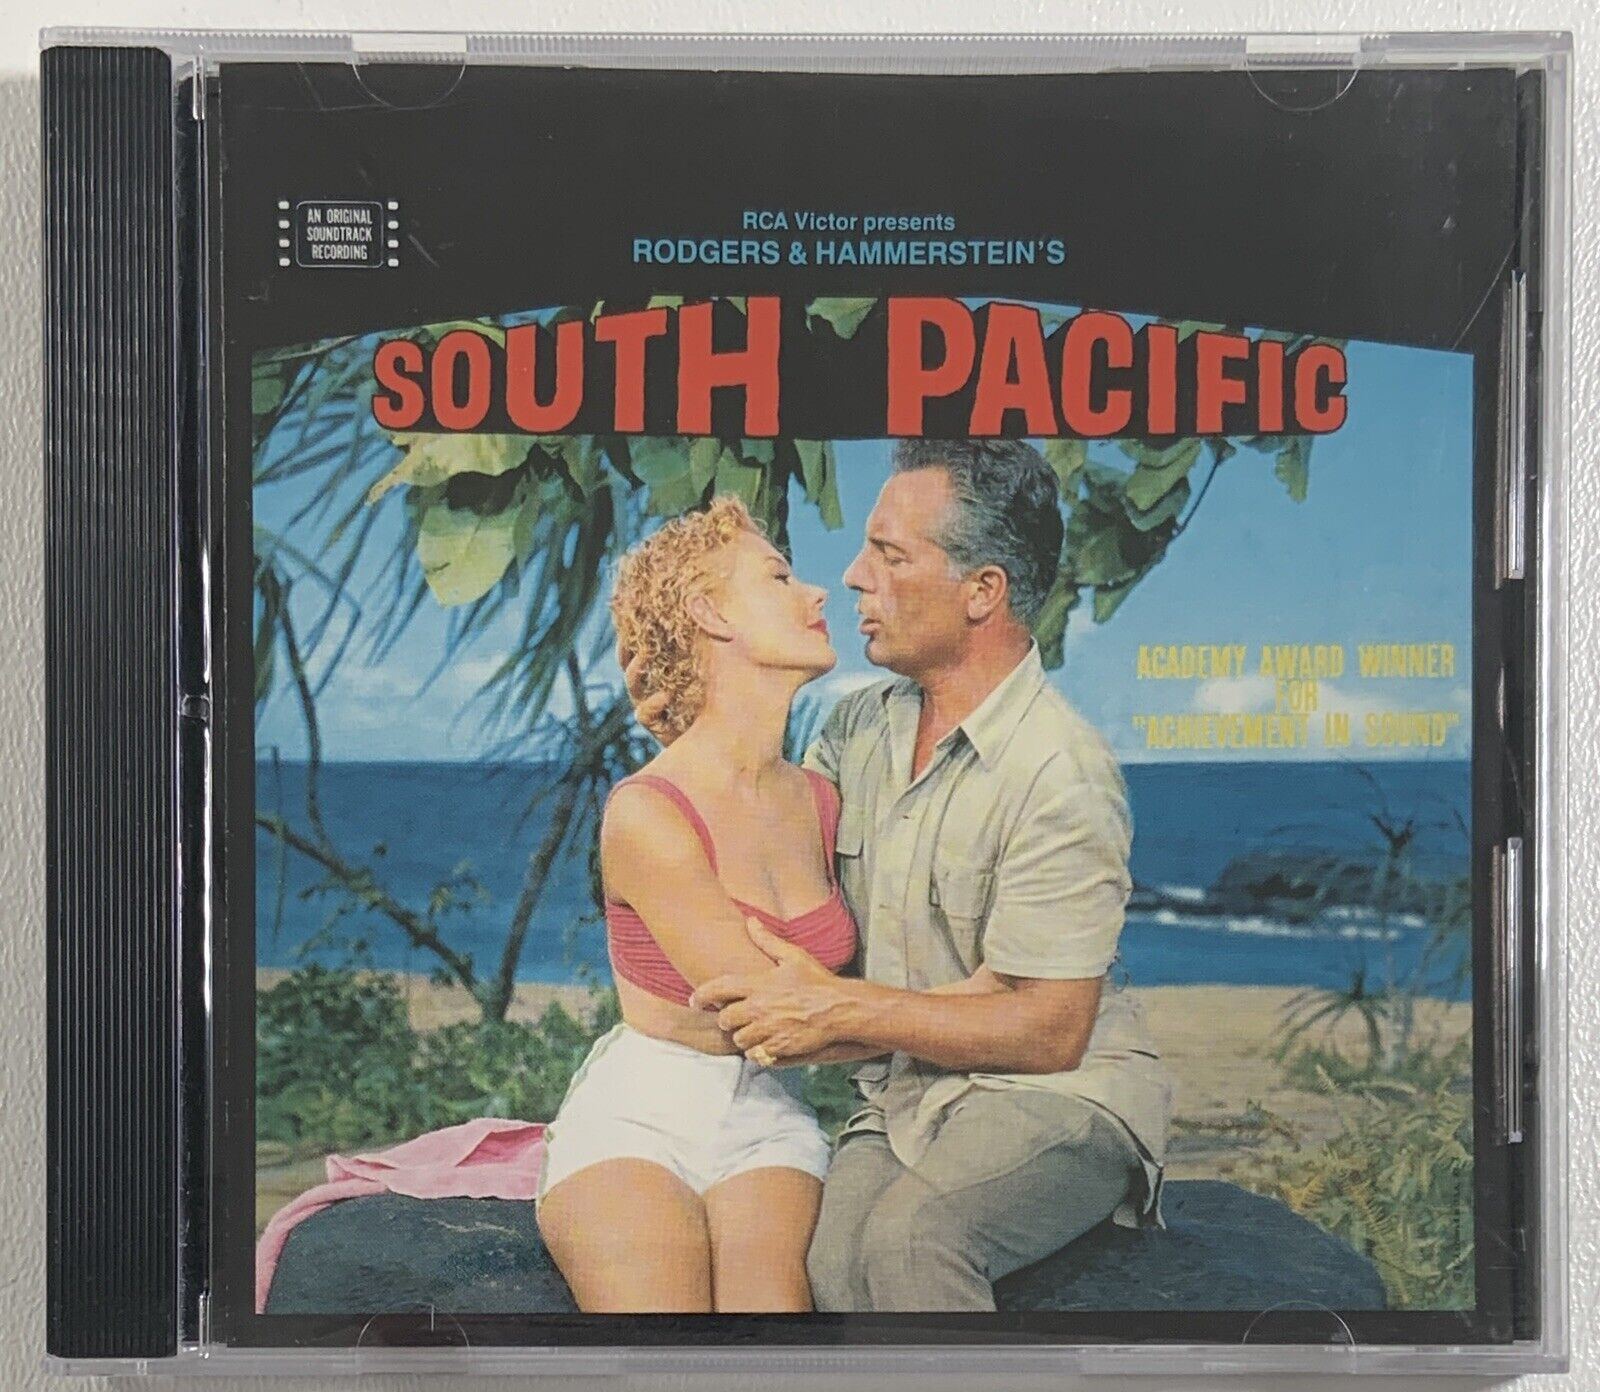 Rodgers & Hammersteins SOUTH PACIFIC Soundtrack CD Rare Promo RCA 